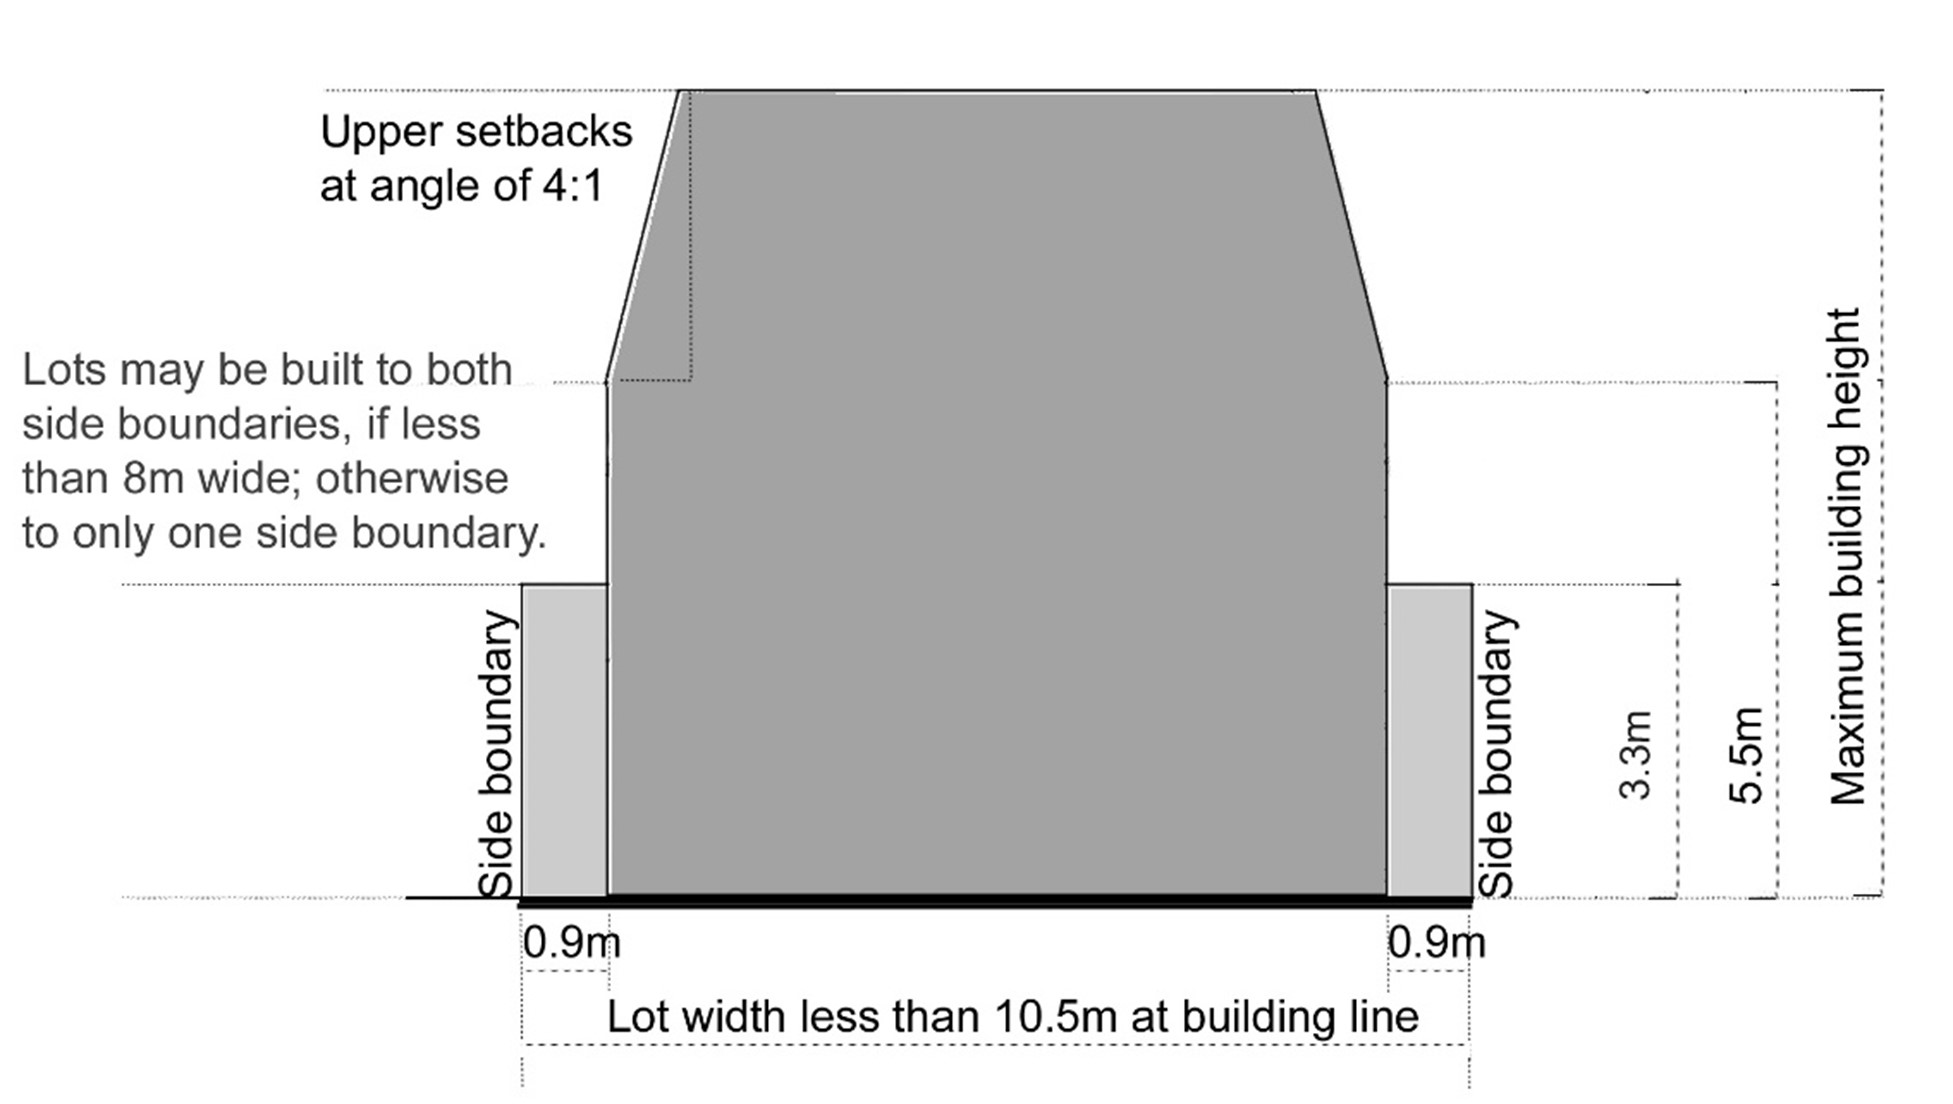 Figure D2.05. Lots with a width measured at the building line of less than 10.5m